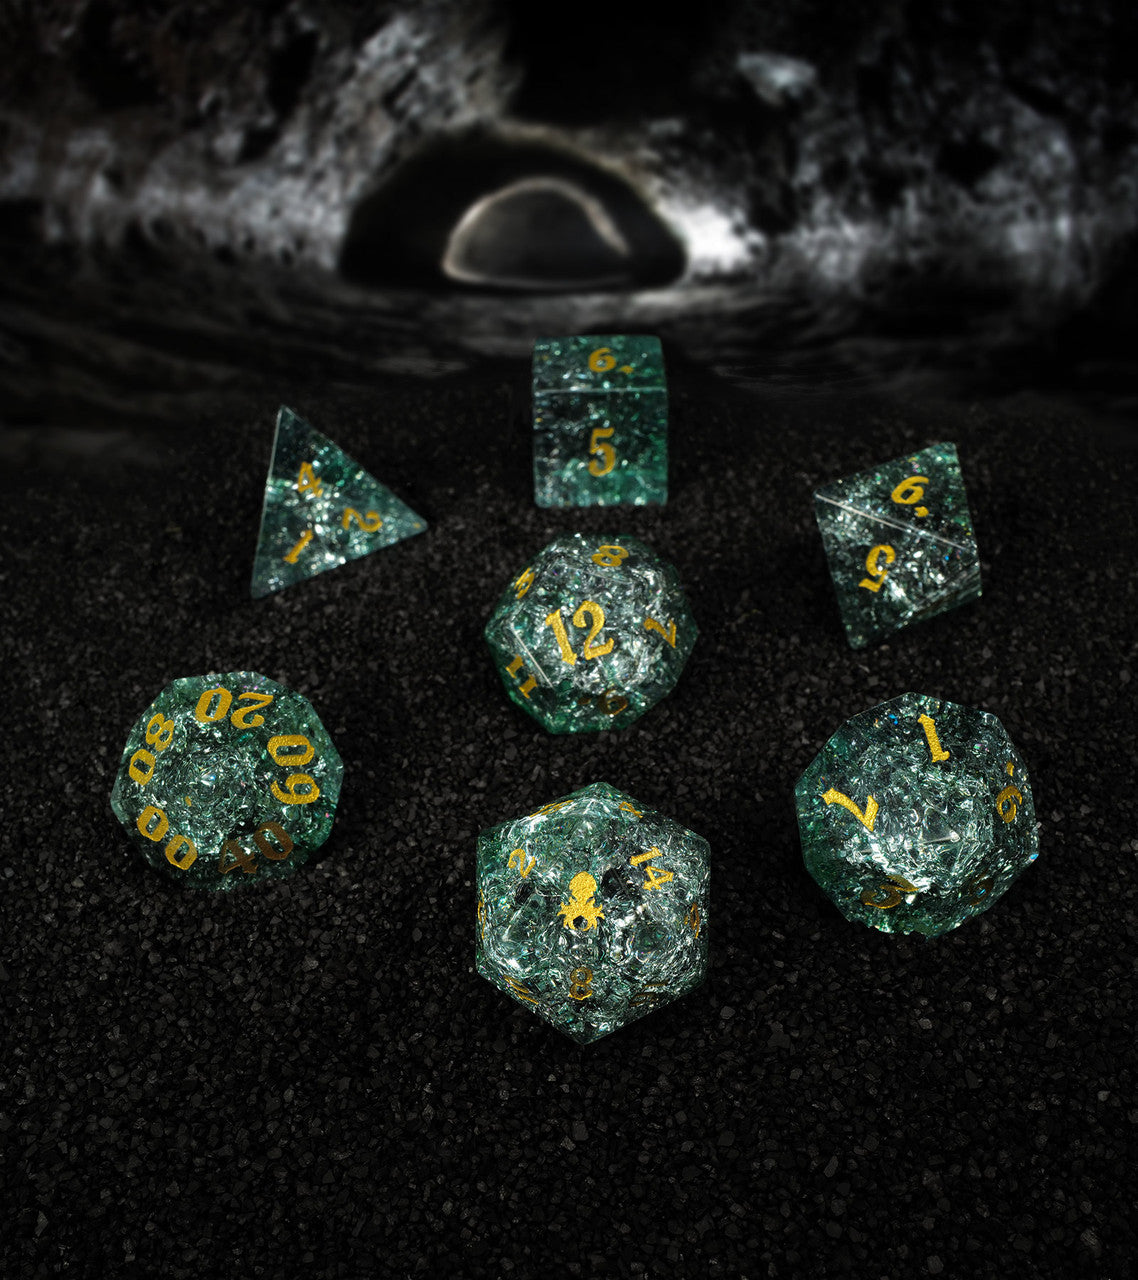 Fragments of Great September Comet Cracked Glass 7PC Glass Dice Set